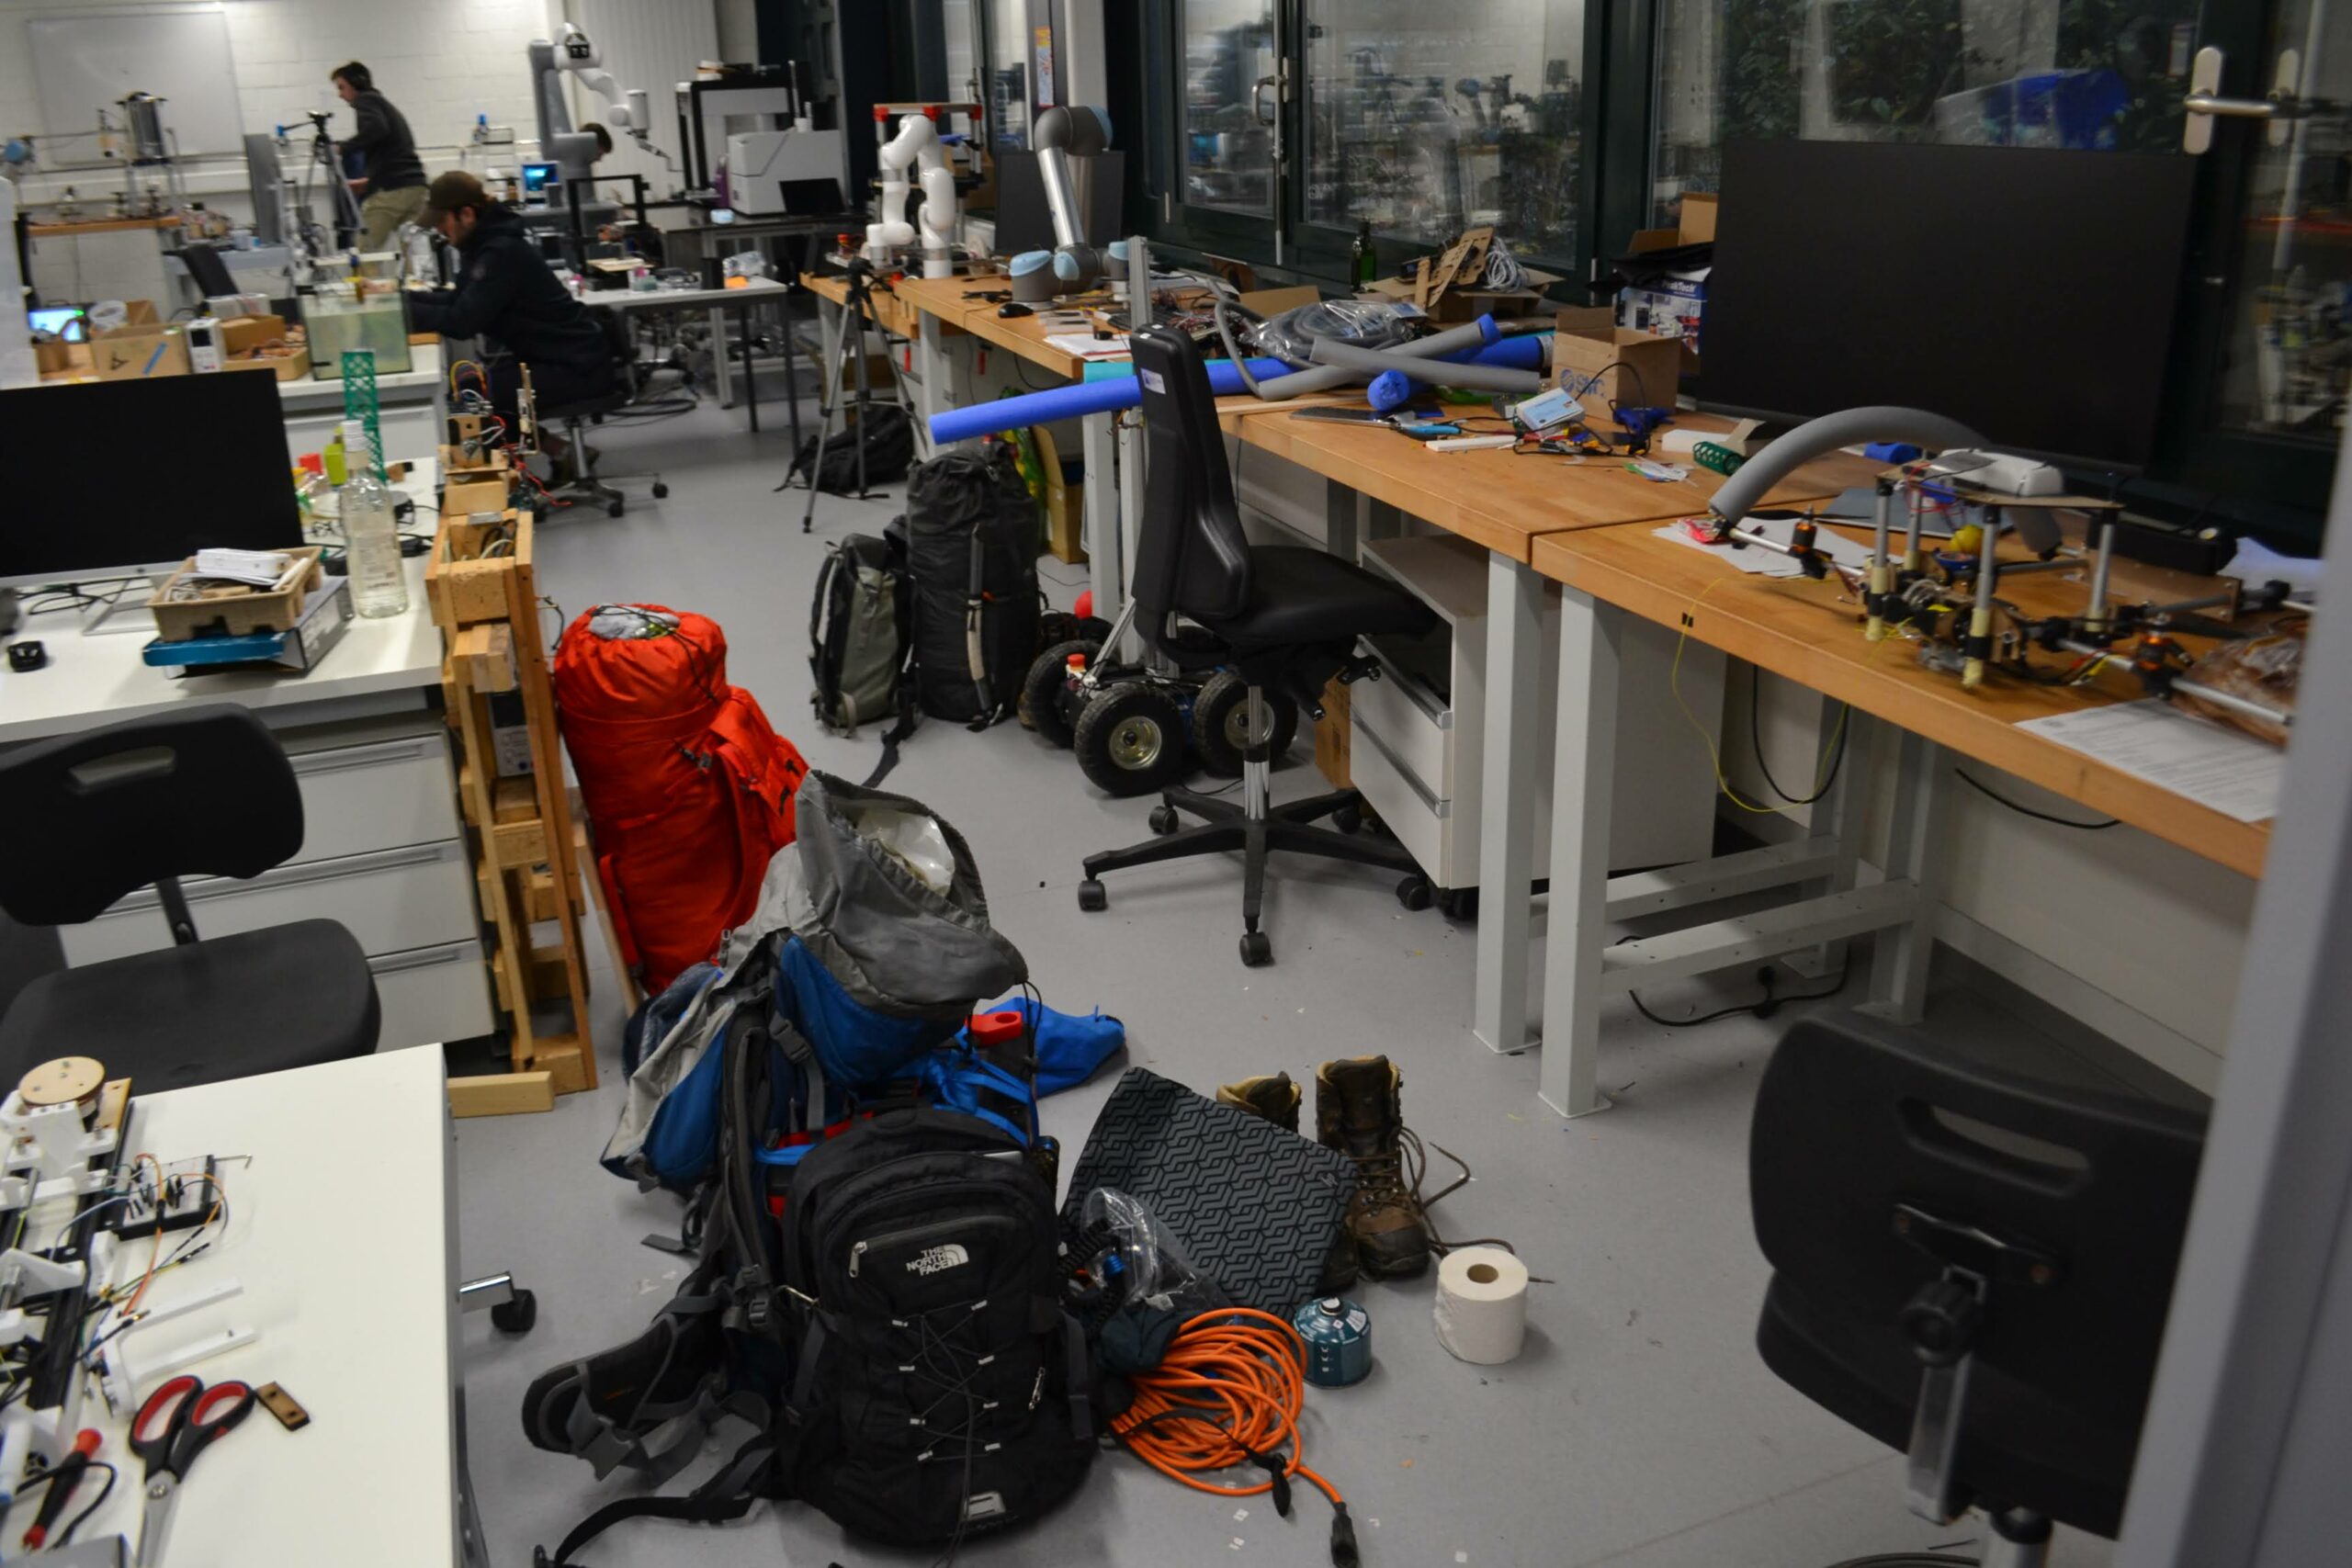 The CREATE Lab full of equipment and luggage just before heading off for field tests